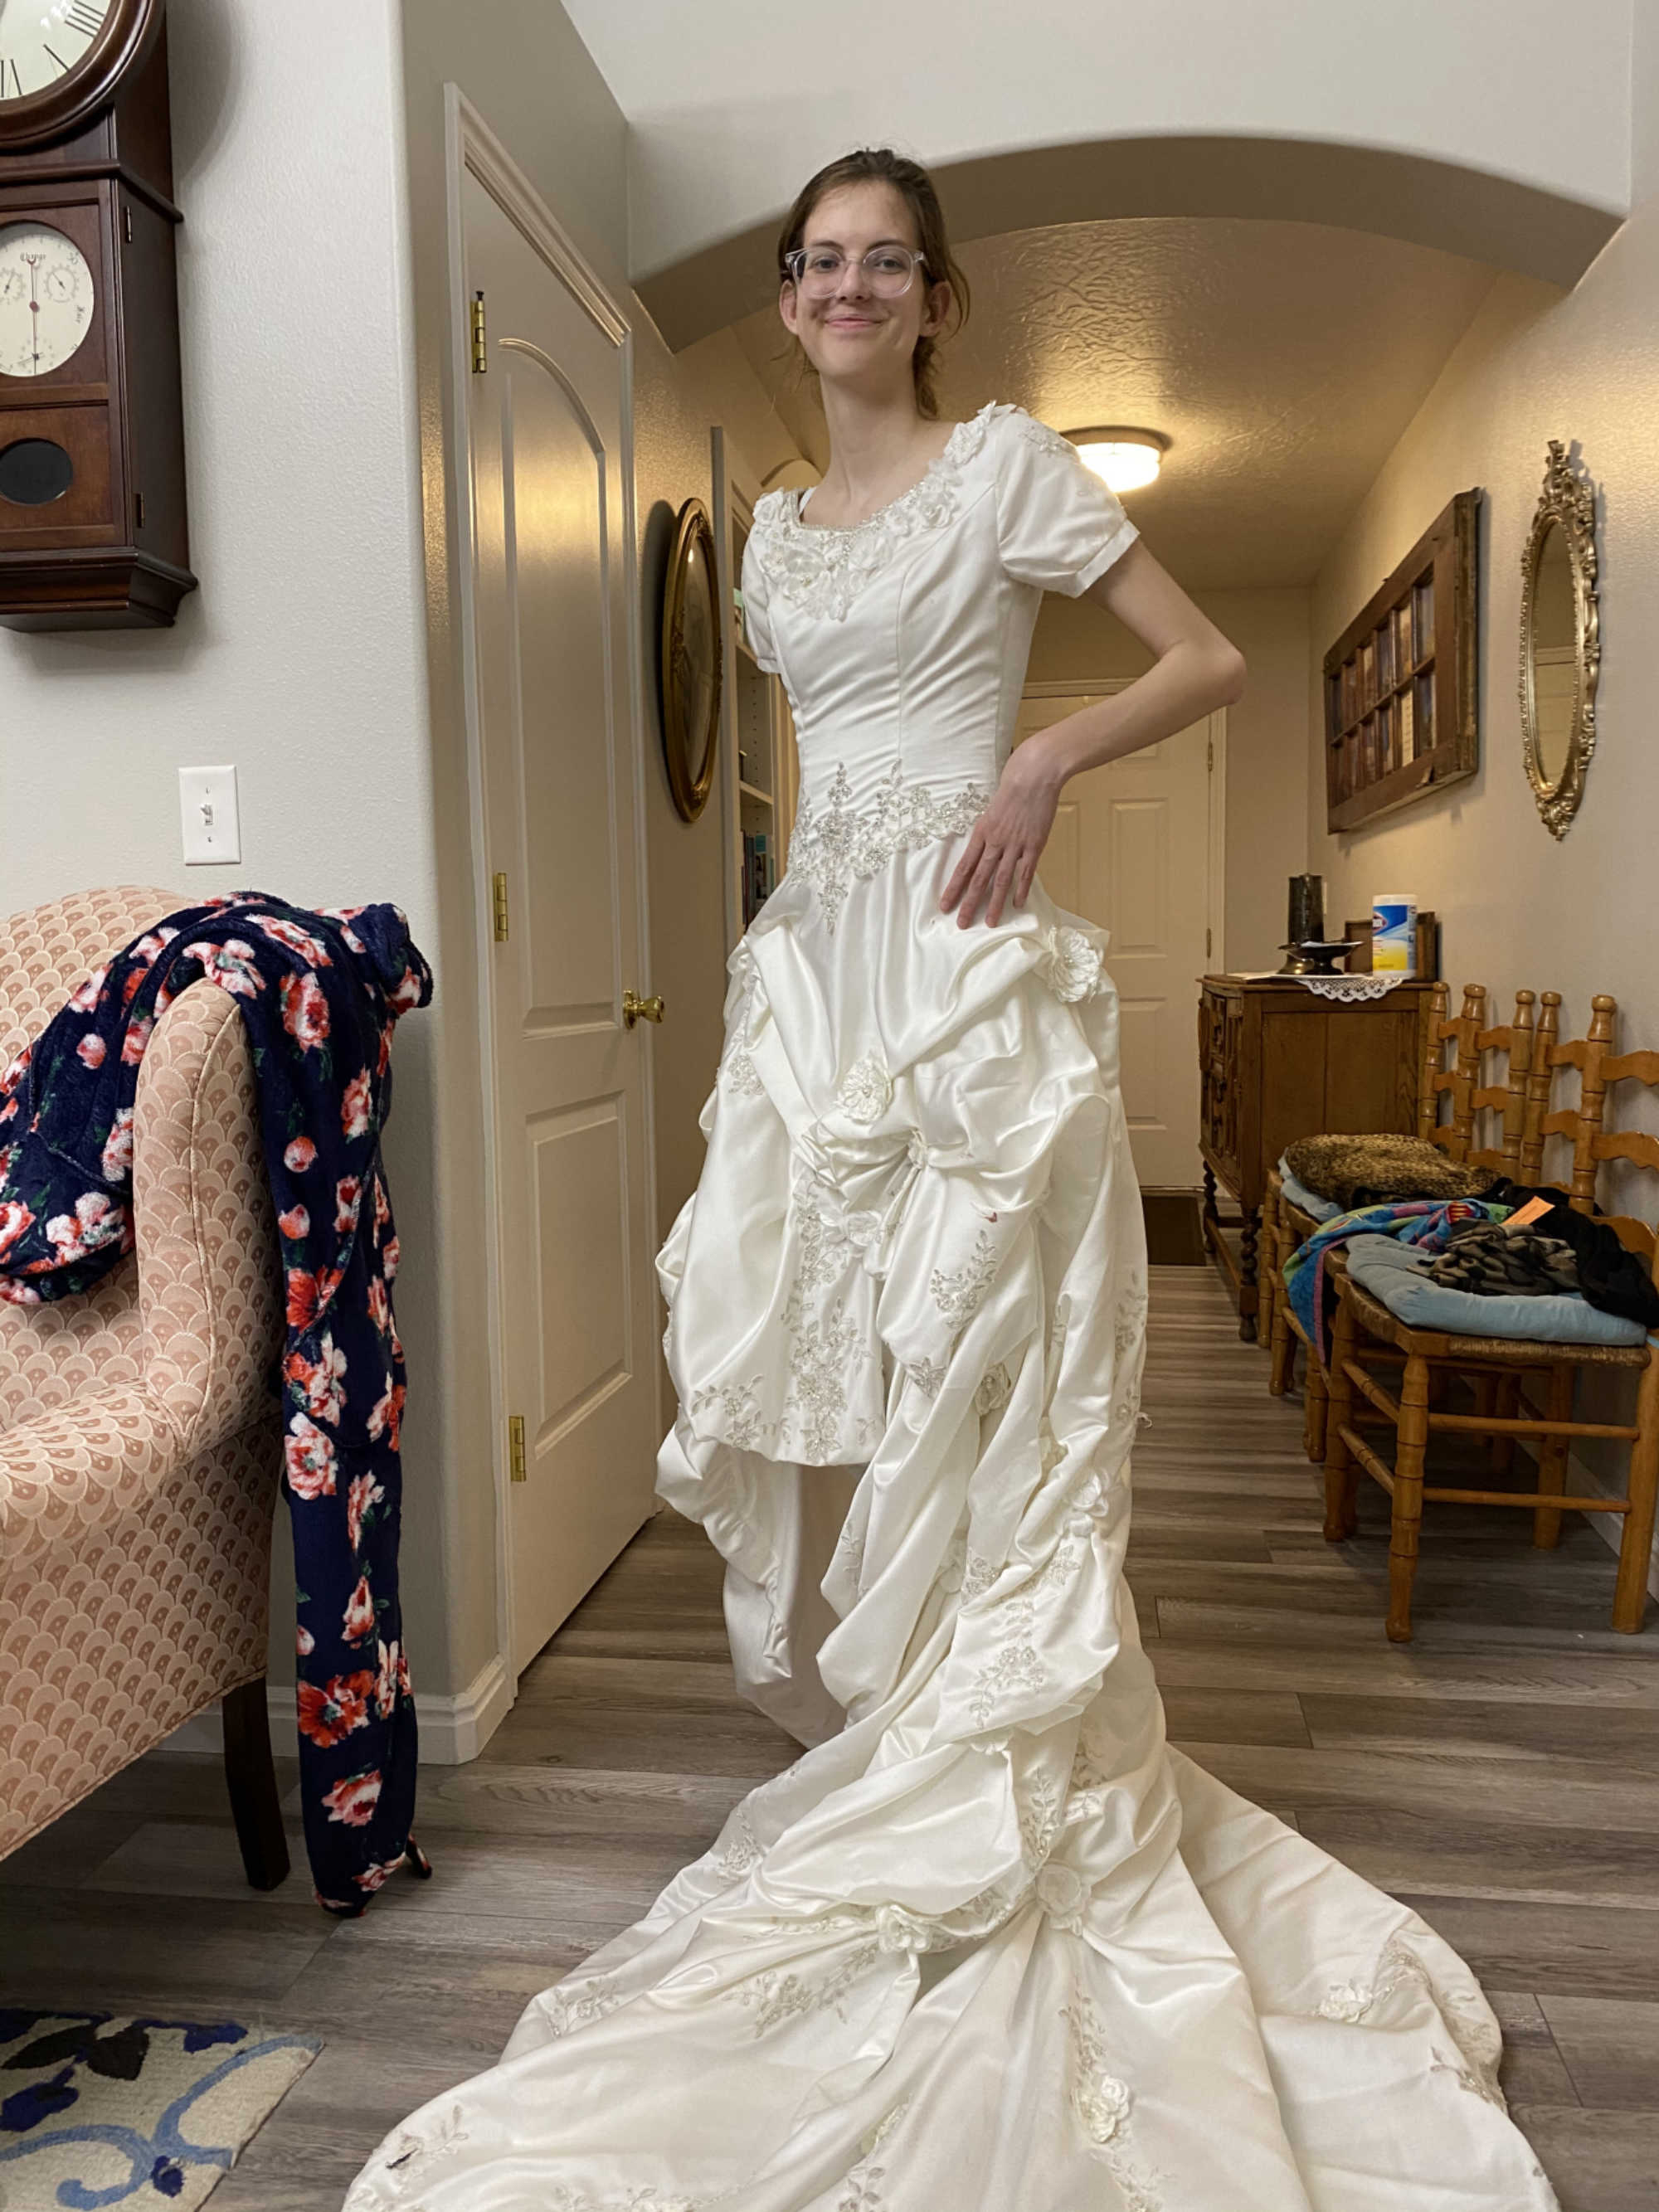 A young woman modeling a secondhand wedding dress bought at Deseret Industries.